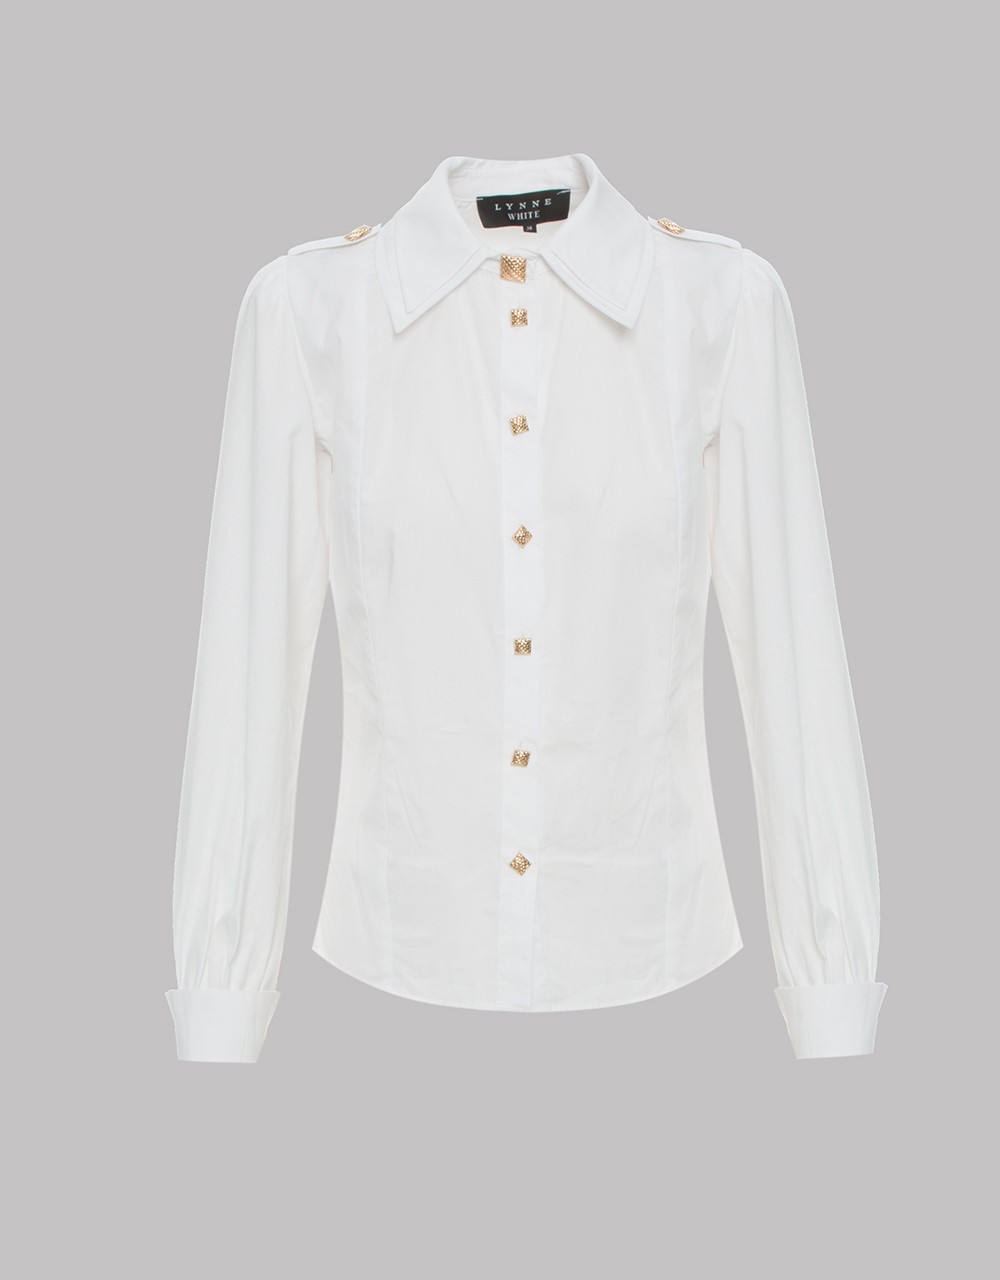 Long sleeve shirt with double collar